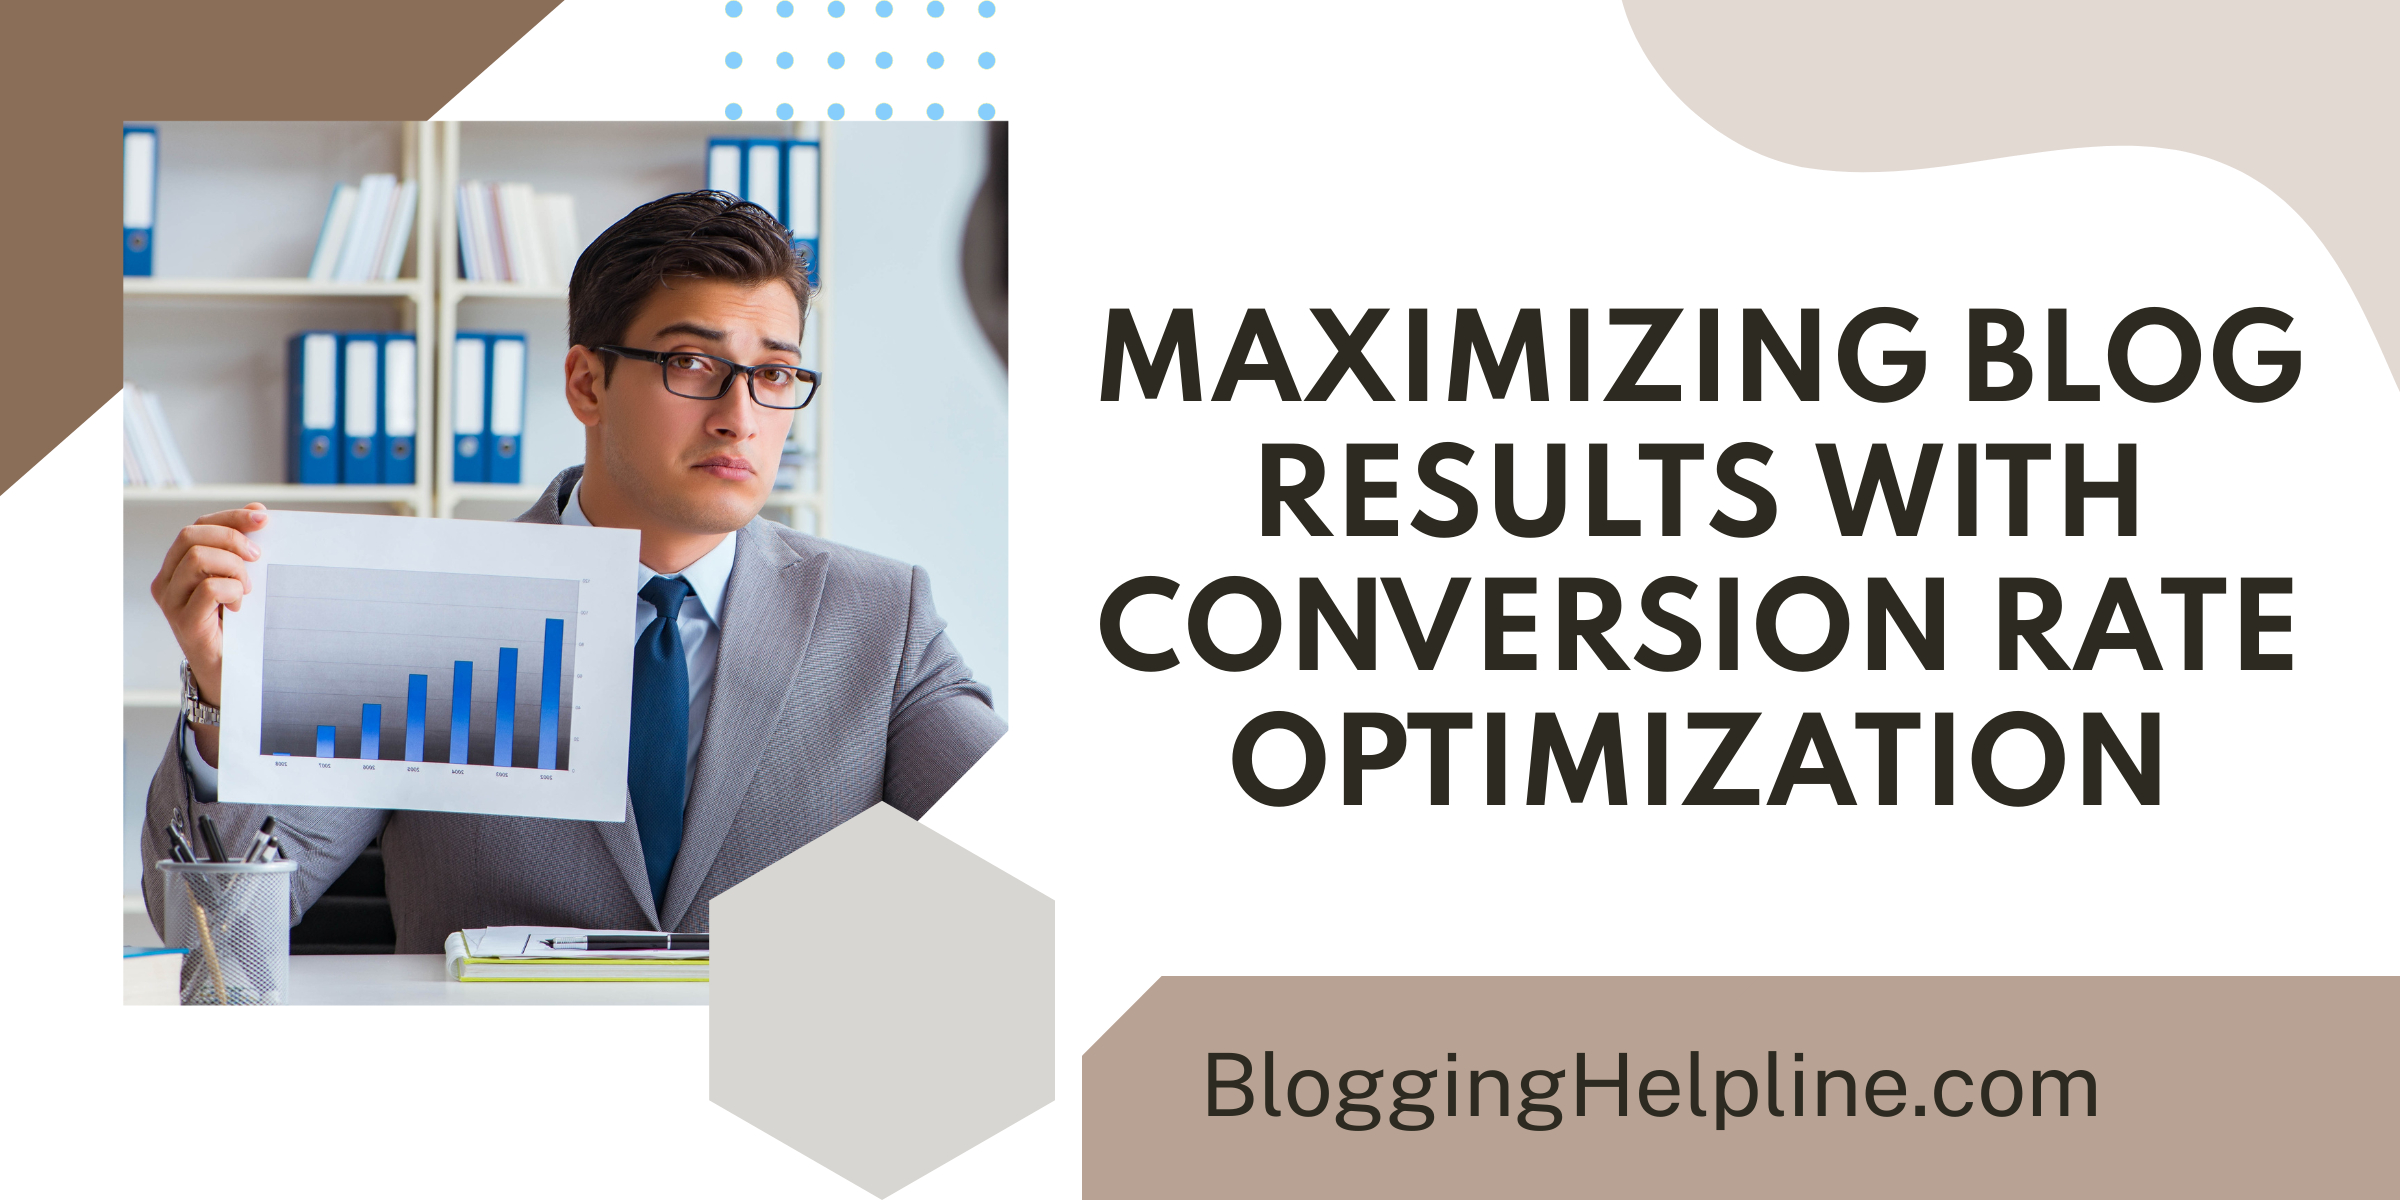 Maximizing Blog Results with Conversion Rate Optimization